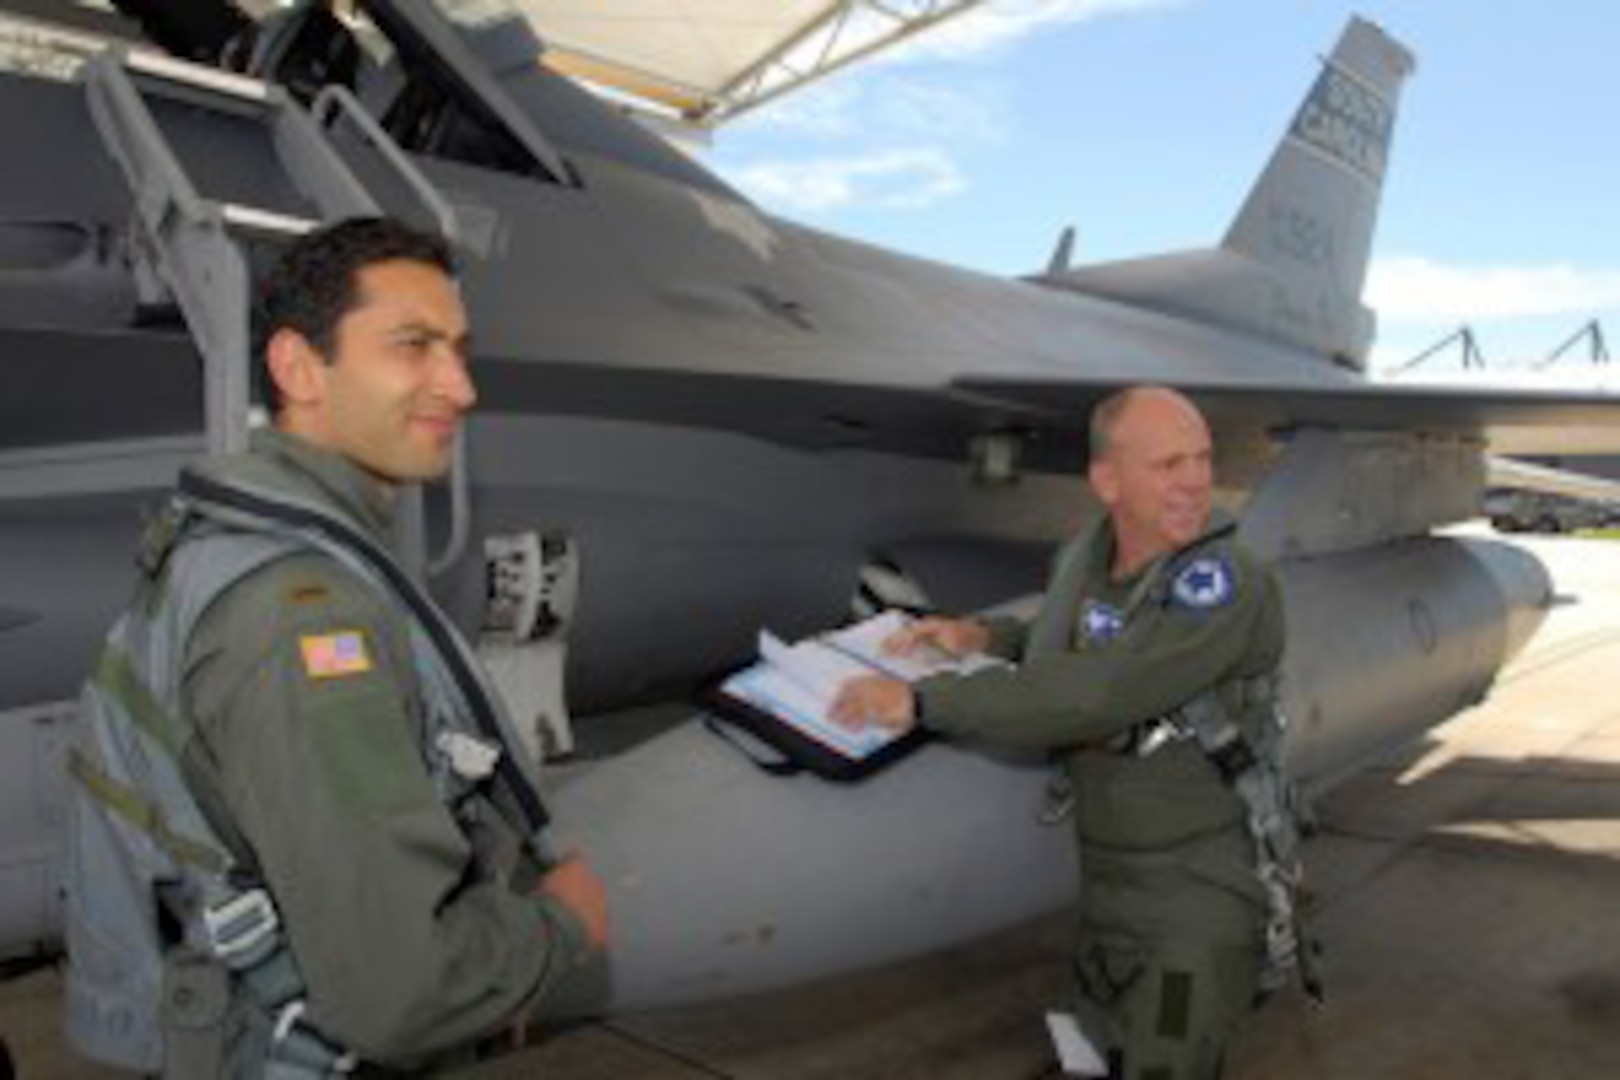 Capt. Fassi Fehri, left, a pilot with the Moroccan air force, receives an F-16 orientation flight, from Air Force Lt. Col. Scott Lambe, commander of the 169th Operations Support Flight at McEntire Joint National Guard Base, S.C. Fehri is to become Morocco's first F-16 fighter pilot. Through the State Partnership program with the Utah Air National Guard, the 169th Fighter Wing from the South Carolina Air National Guard has agreed to assist the Moroccan air force with their transition to F-16 fighter operations.